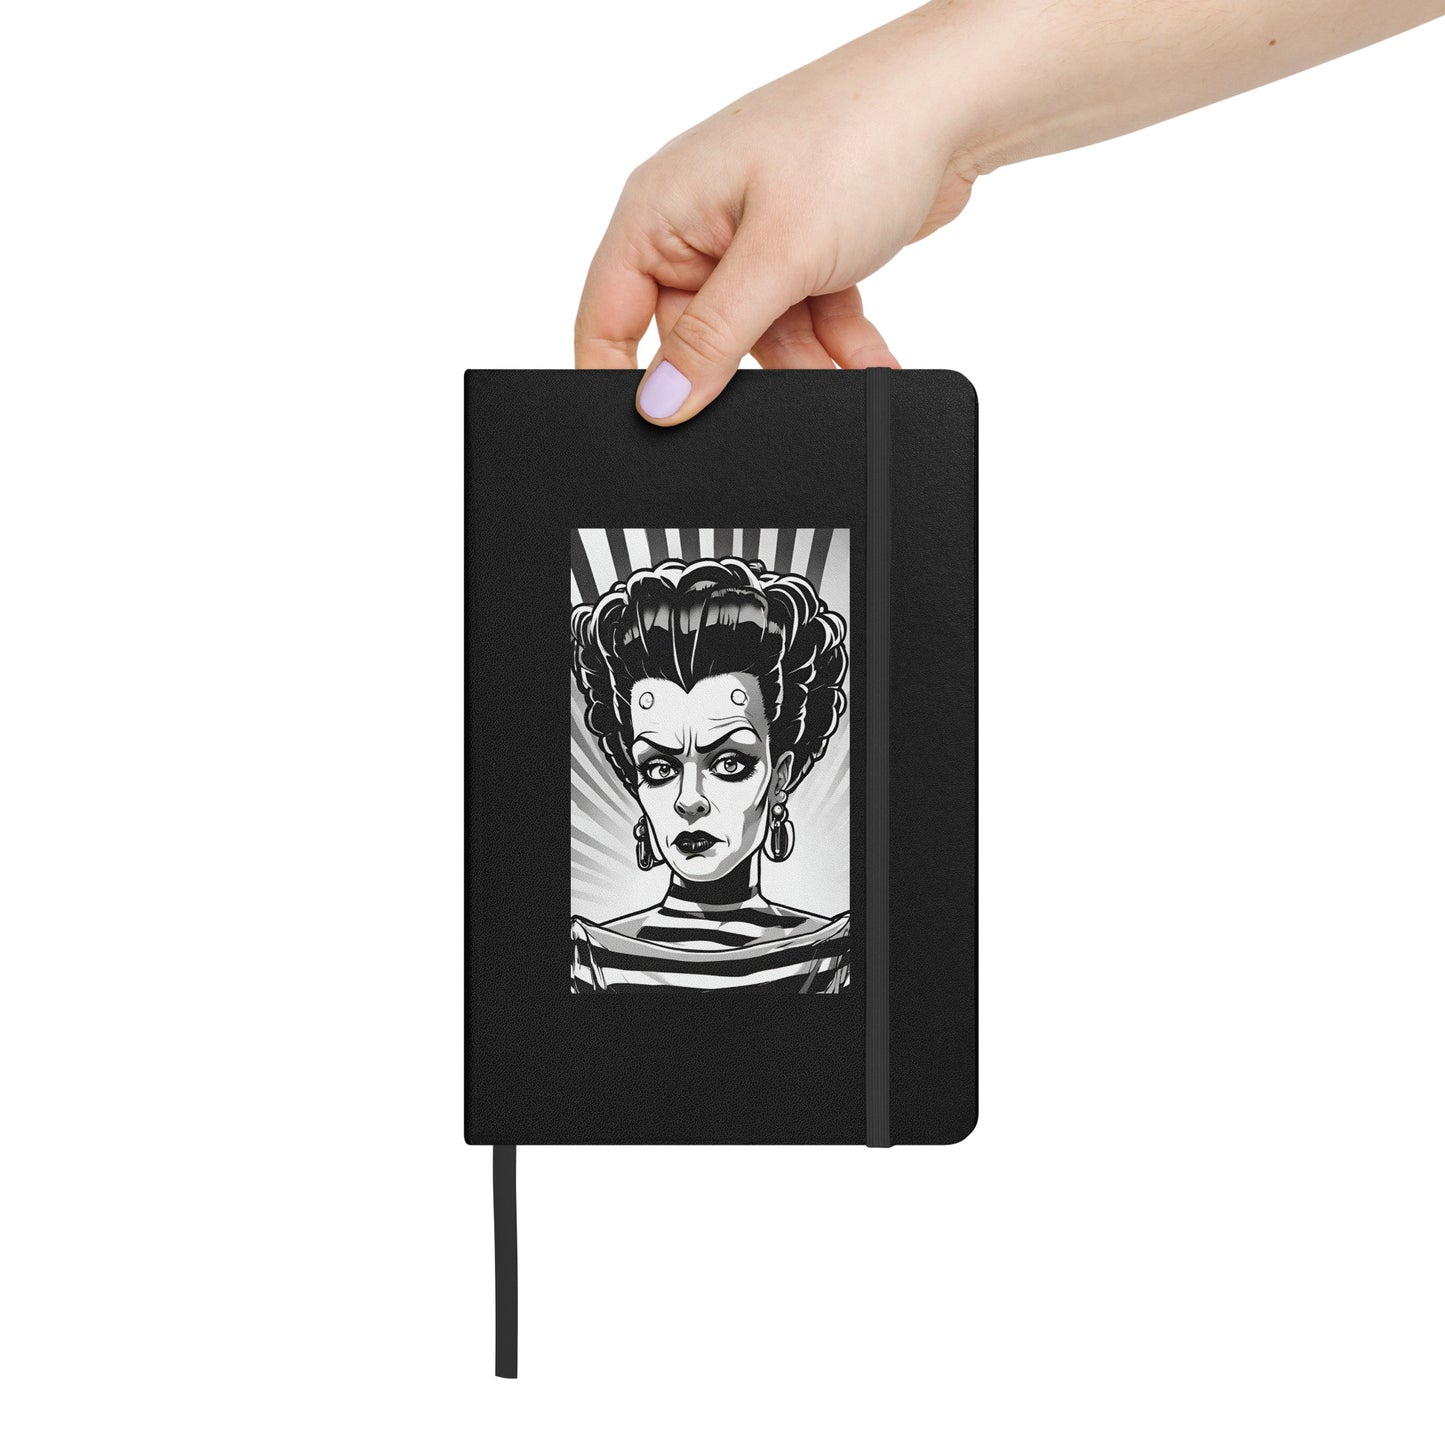 RIZZO HARDCOVER BOUND NOTEBOOK